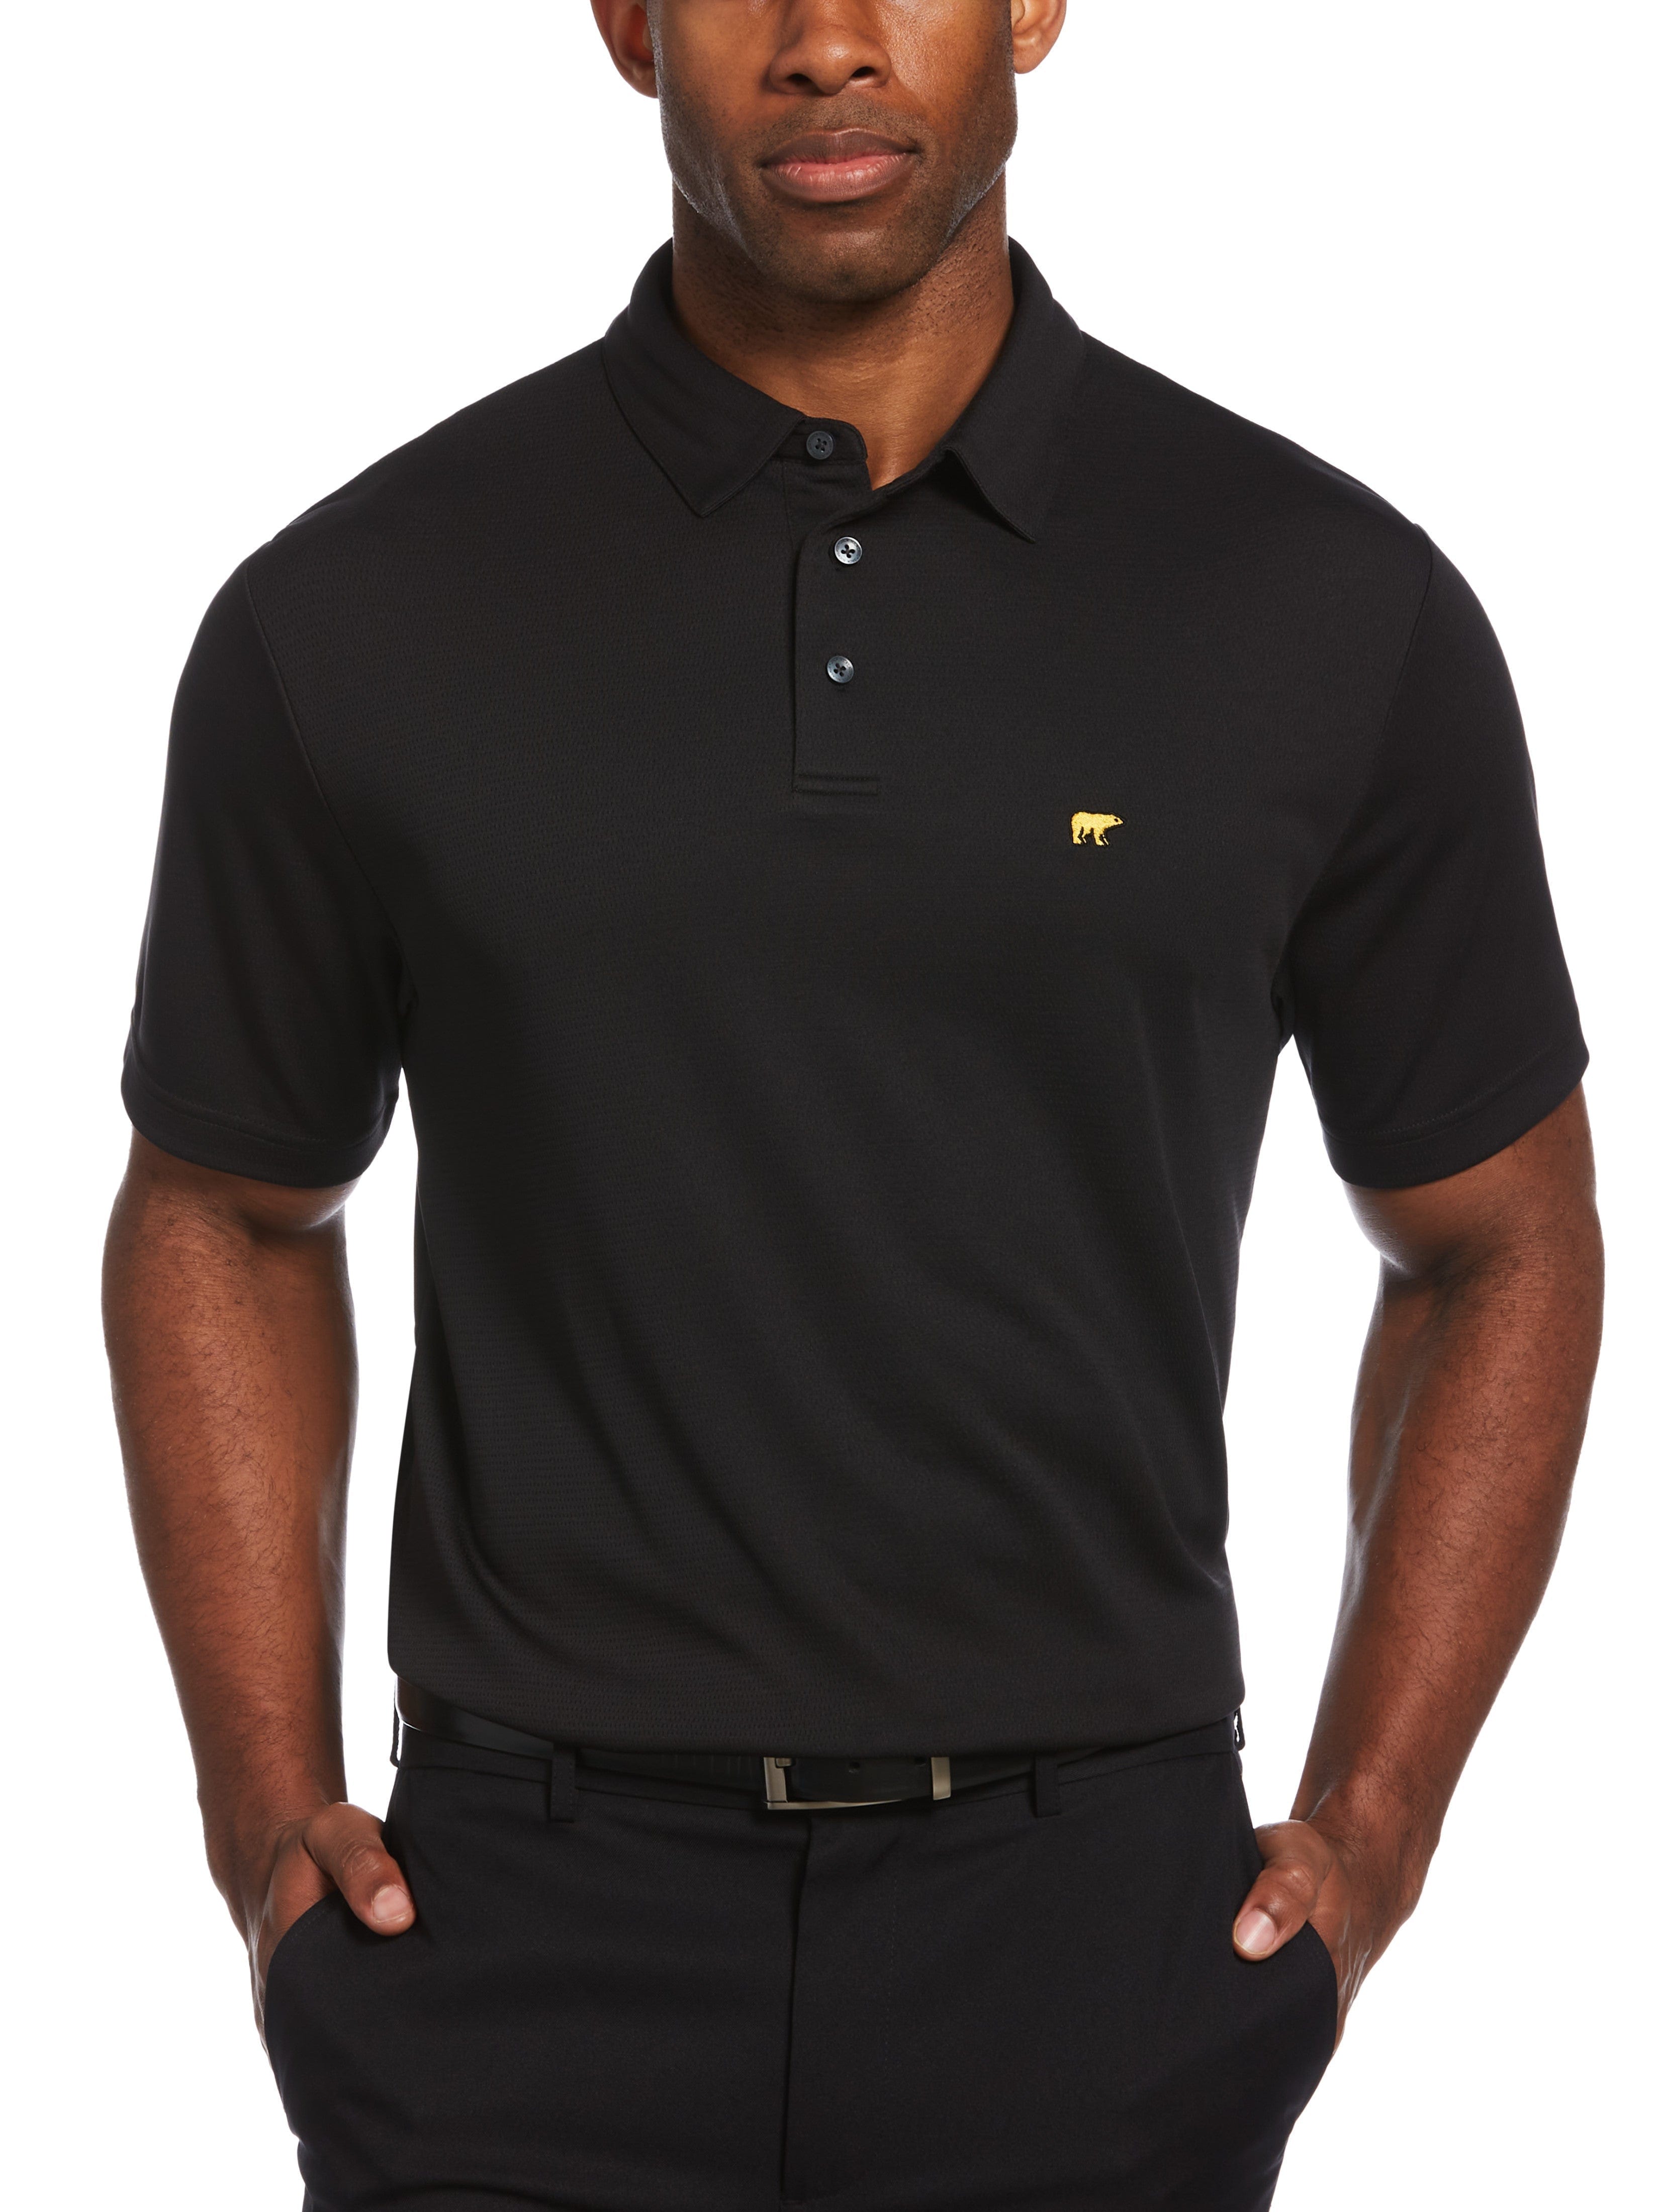 Jack Nicklaus Mens Solid Textured Golf Polo Shirt, Size Large, Black, 100% Polyester | Golf Apparel Shop